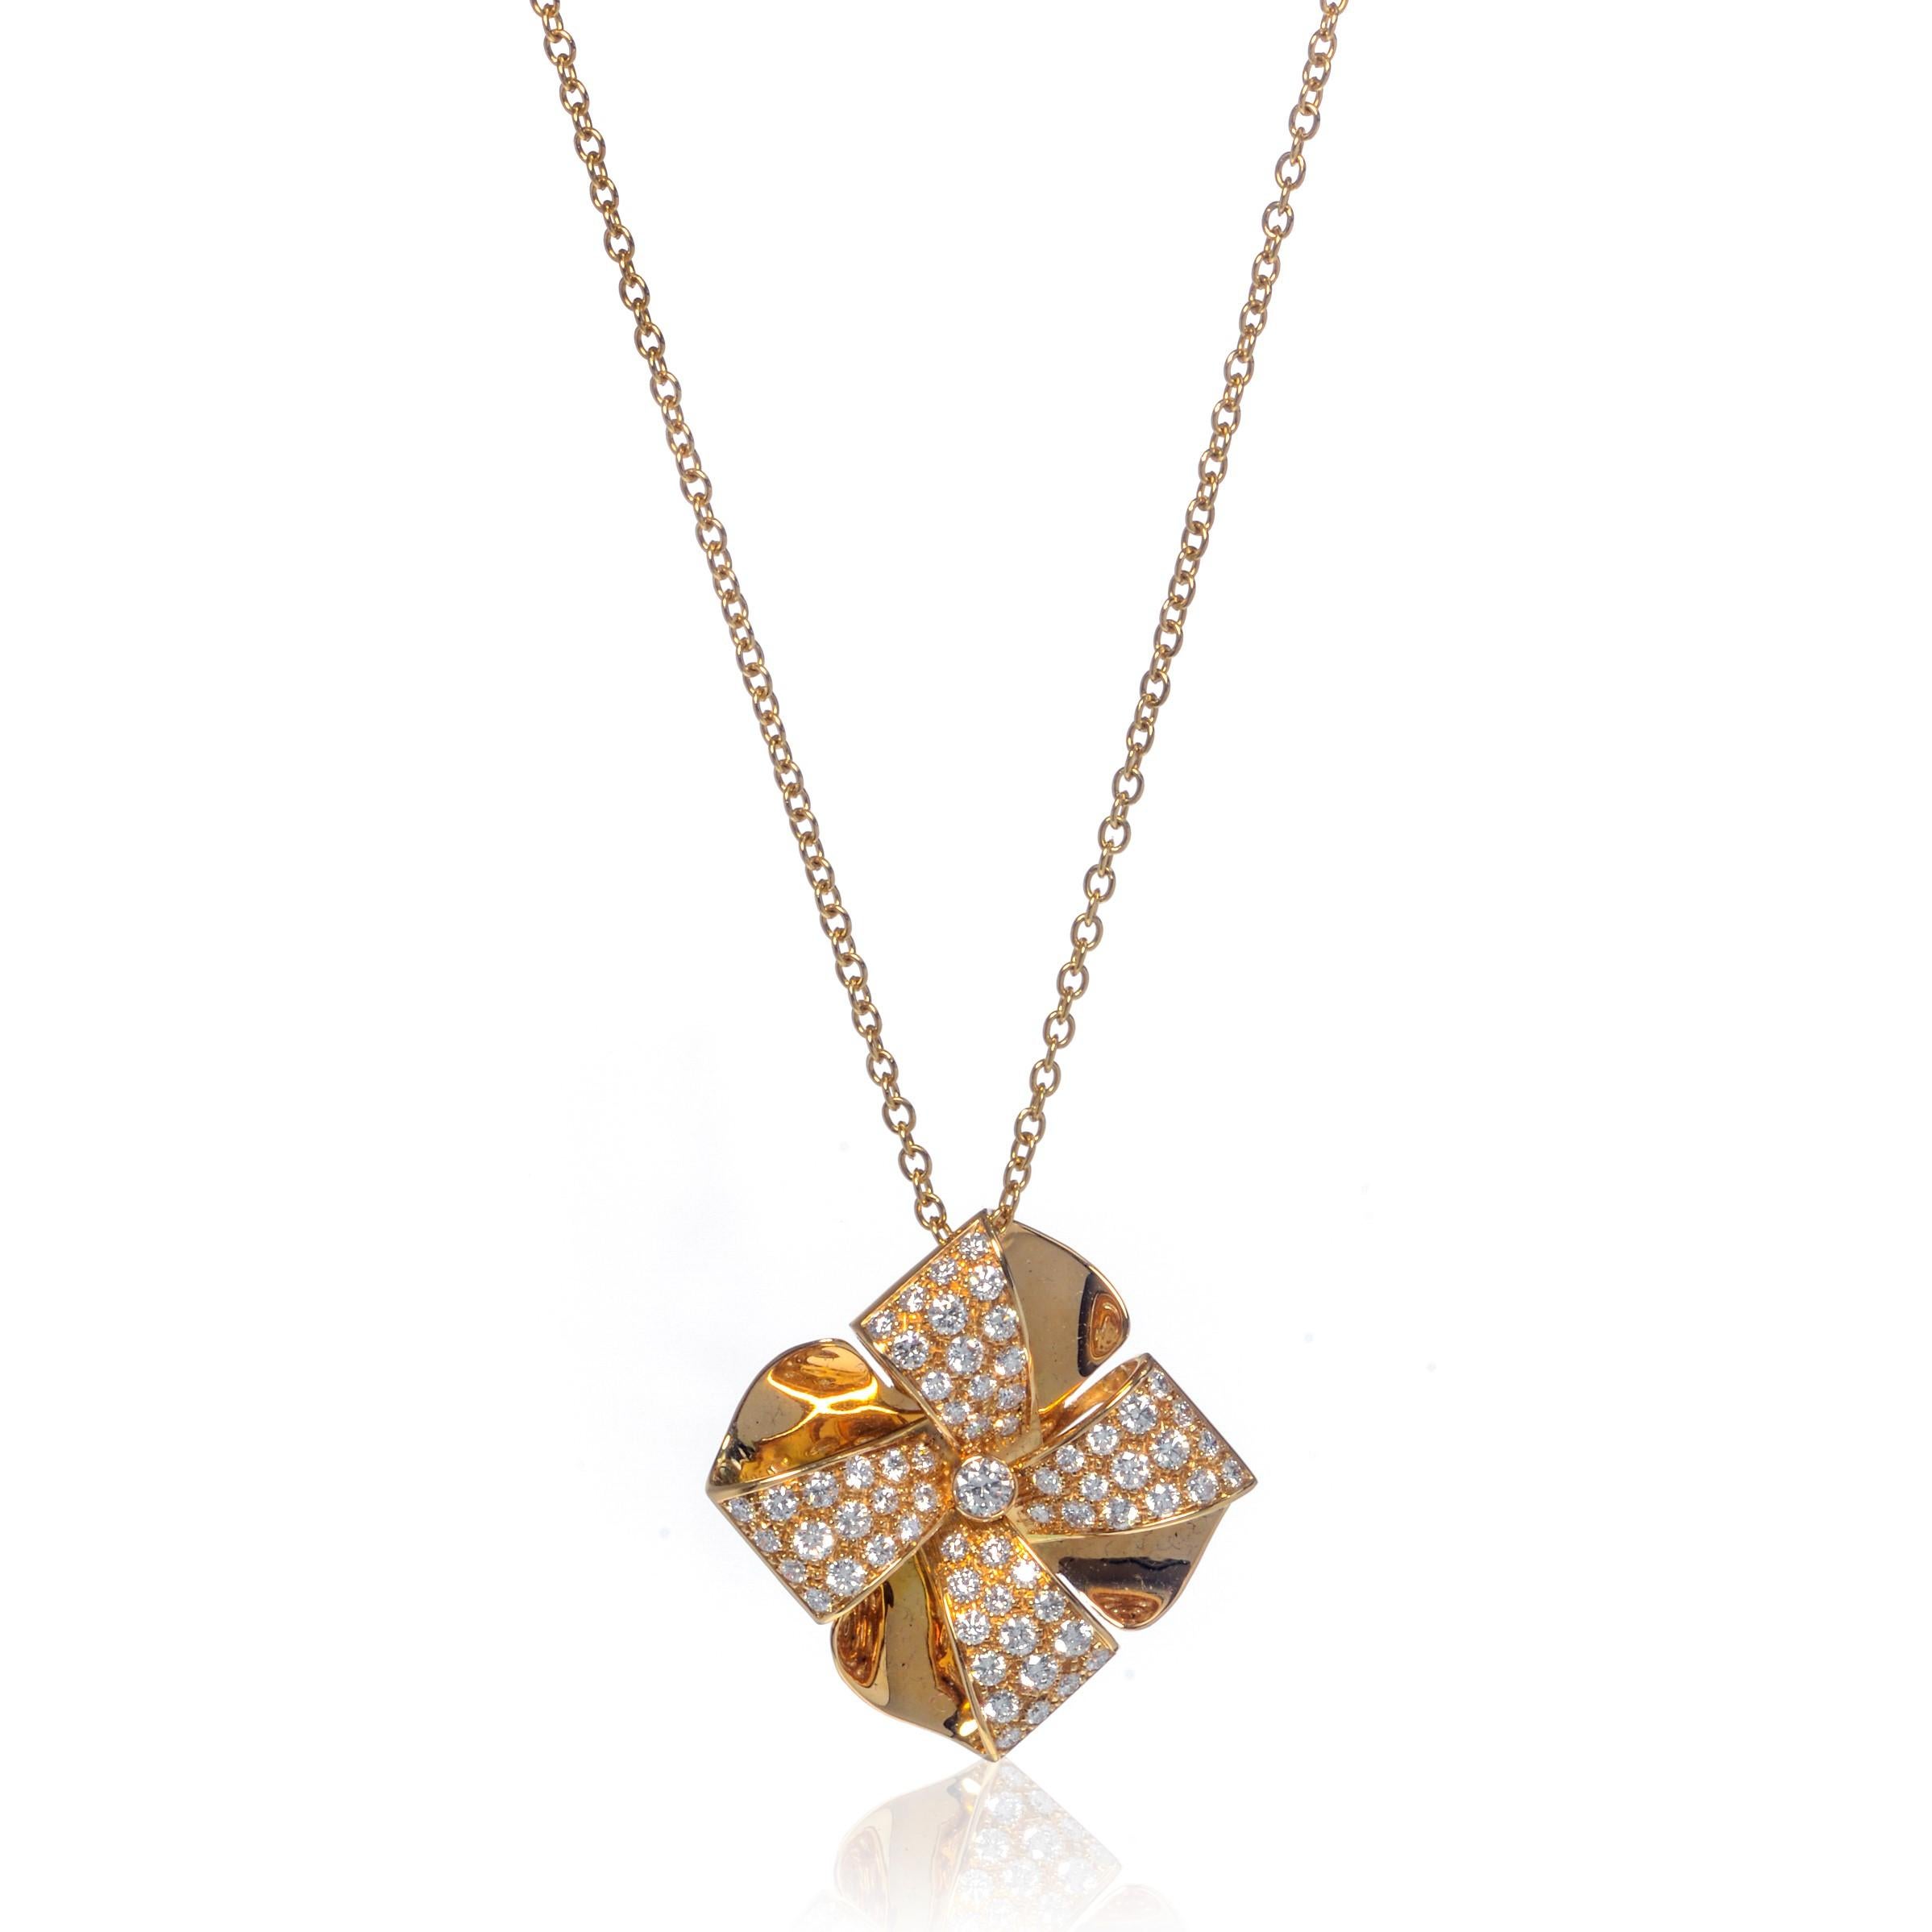 This beautiful Luca Carati 18k yellow gold pendant necklace features a gorgeous display of diamonds 1.73cttw with a flower shaped design. Dimond color G and VVS clarity. Weight: 12.5 grams. Chain length: 16.5 inches. Pendant size: 1 inch. Comes with